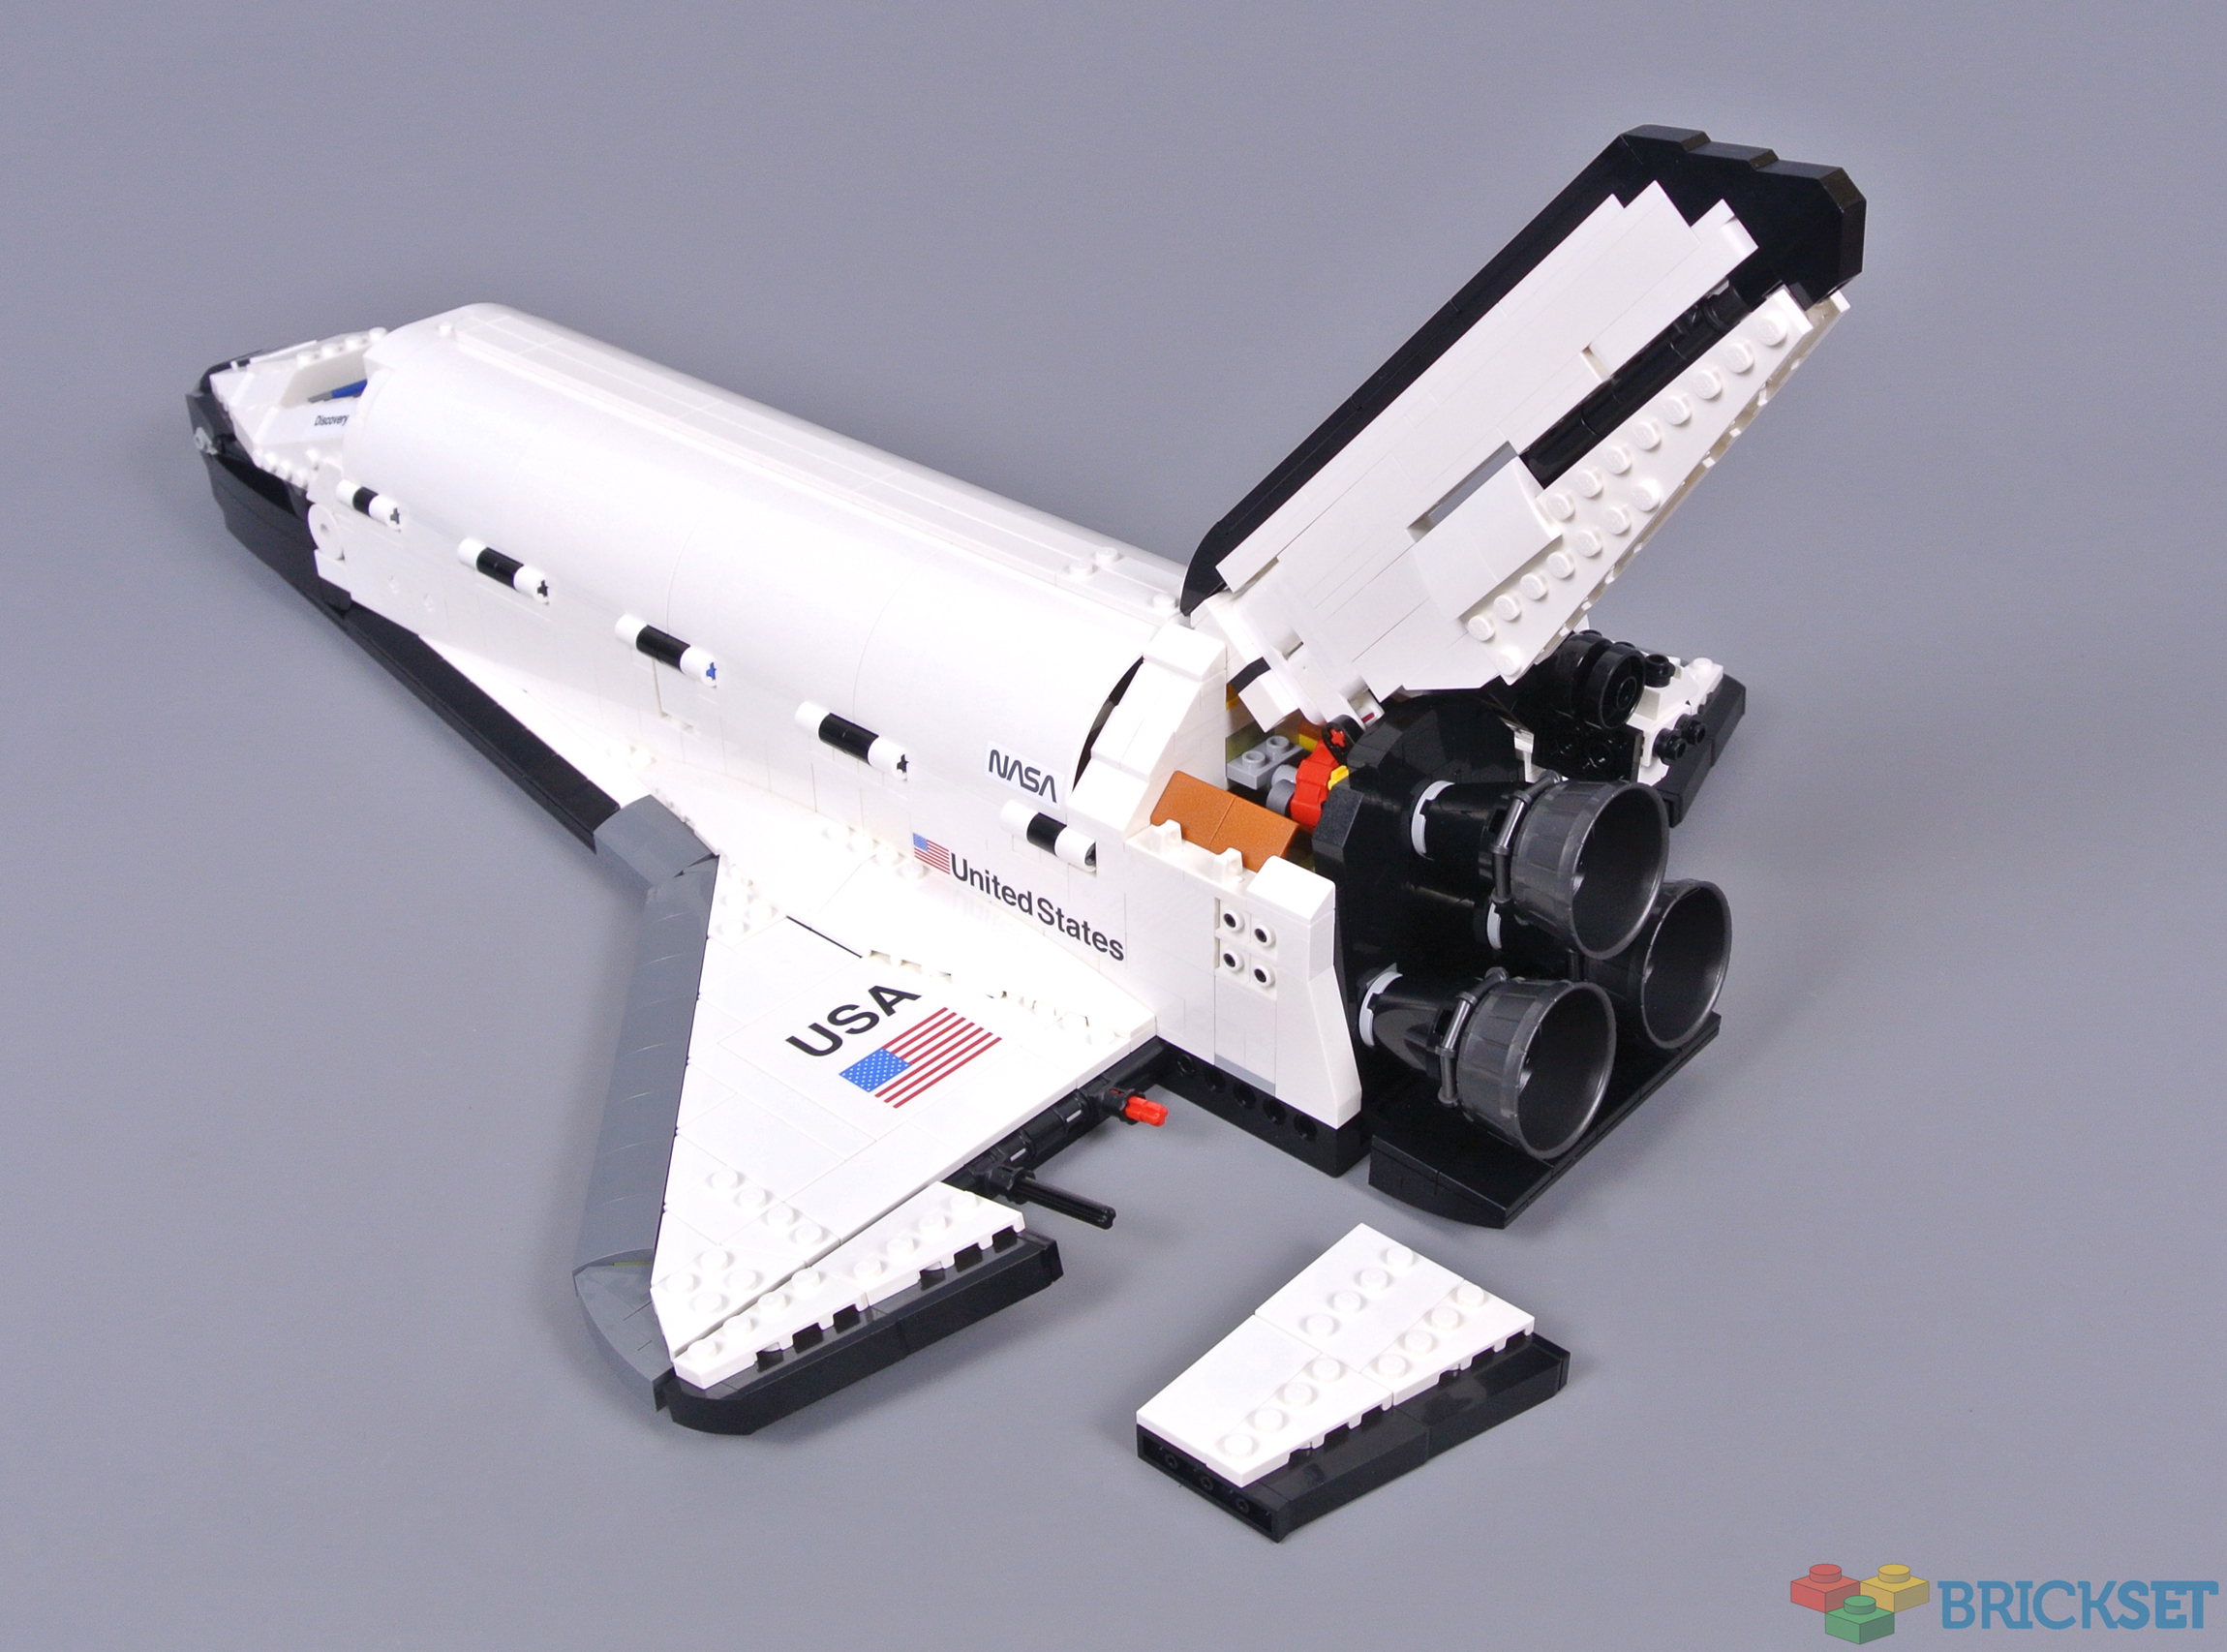 LEGO Space Shuttle Discovery review: - 9to5Toys